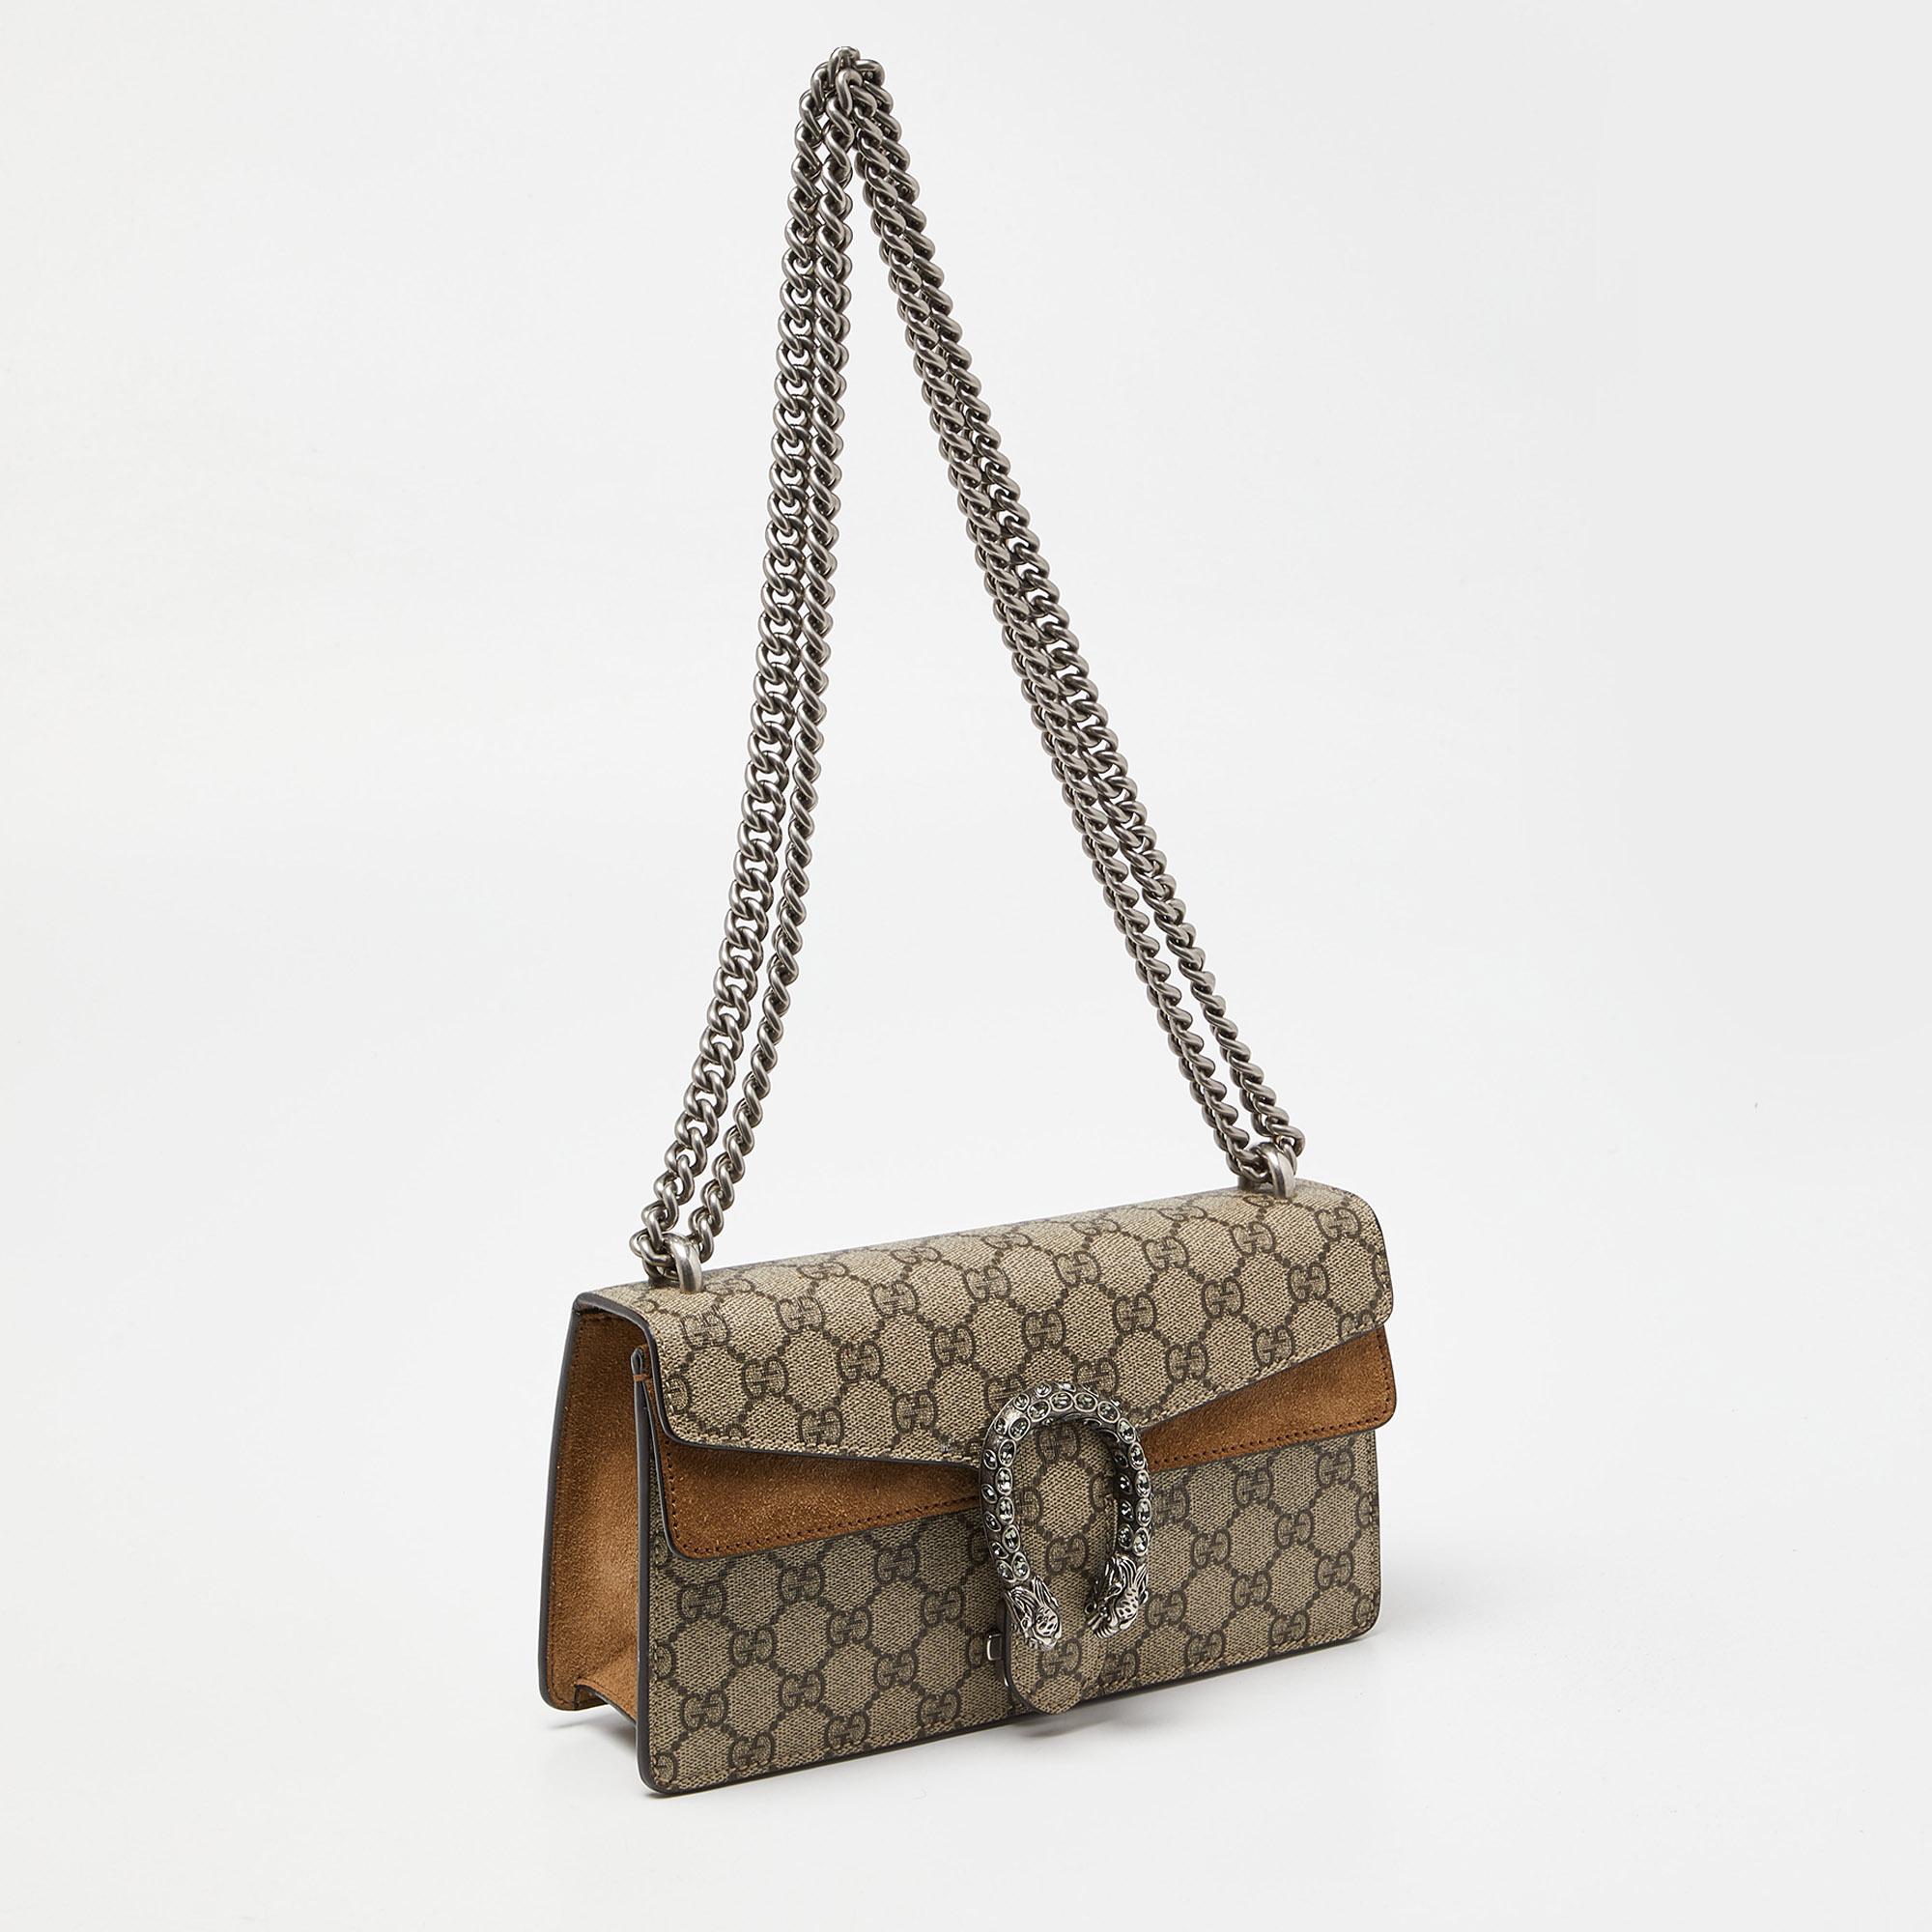 Gucci Beige GG Supreme Canvas and Suede Small Rectangular Dionysus Shoulder Bag For Sale 8